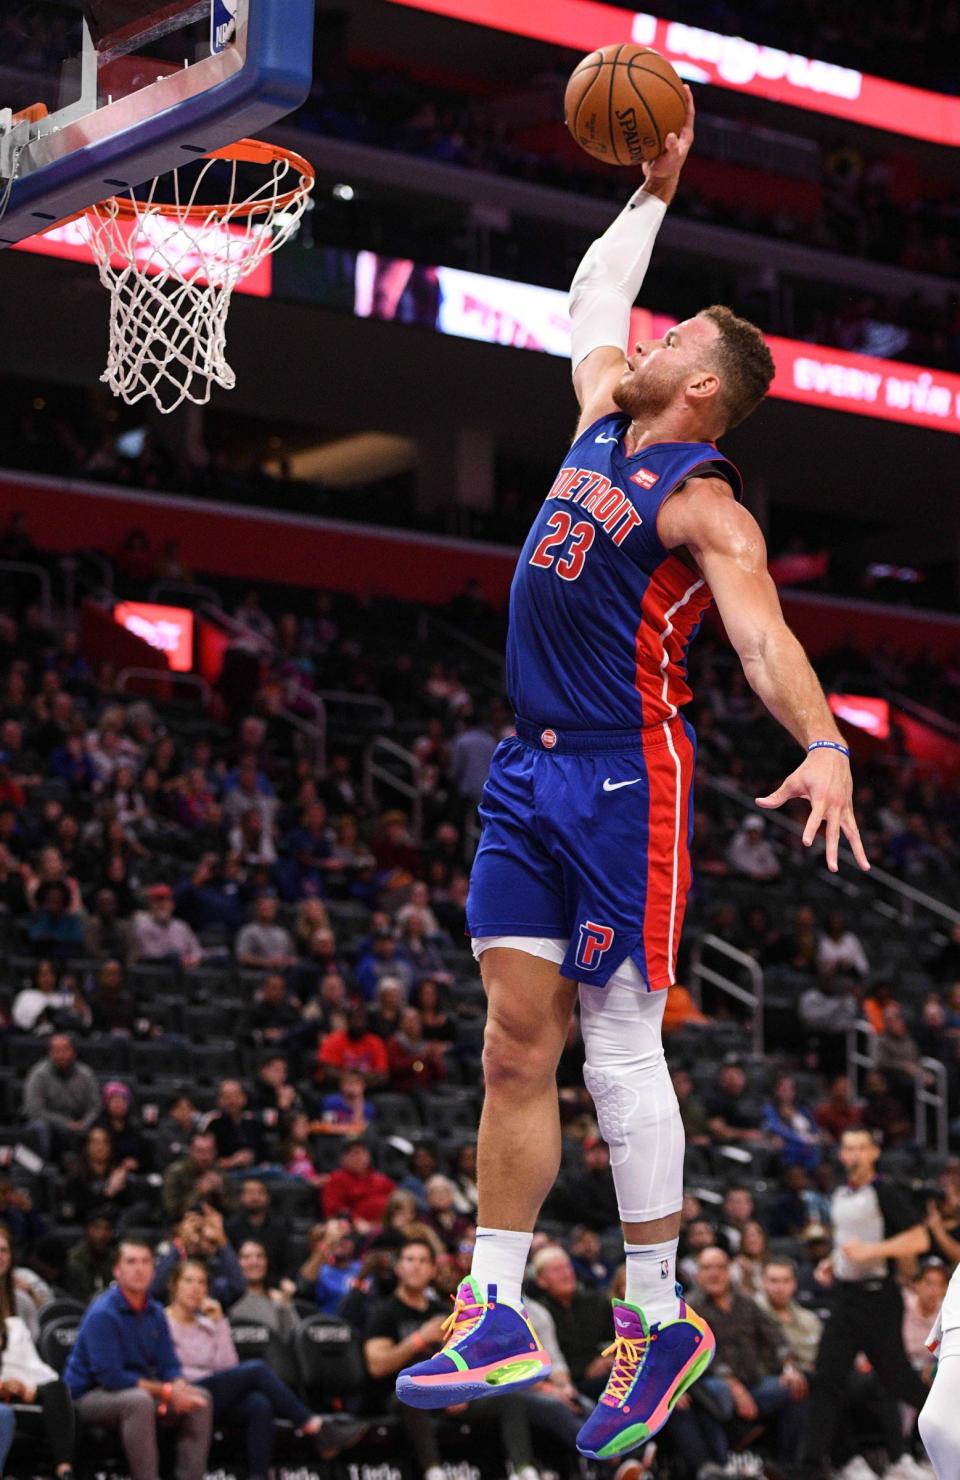 Blake Griffin was still one of the most exciting dunkers in the game when he arrived in Detroit. He hasn't dunked since 2019.